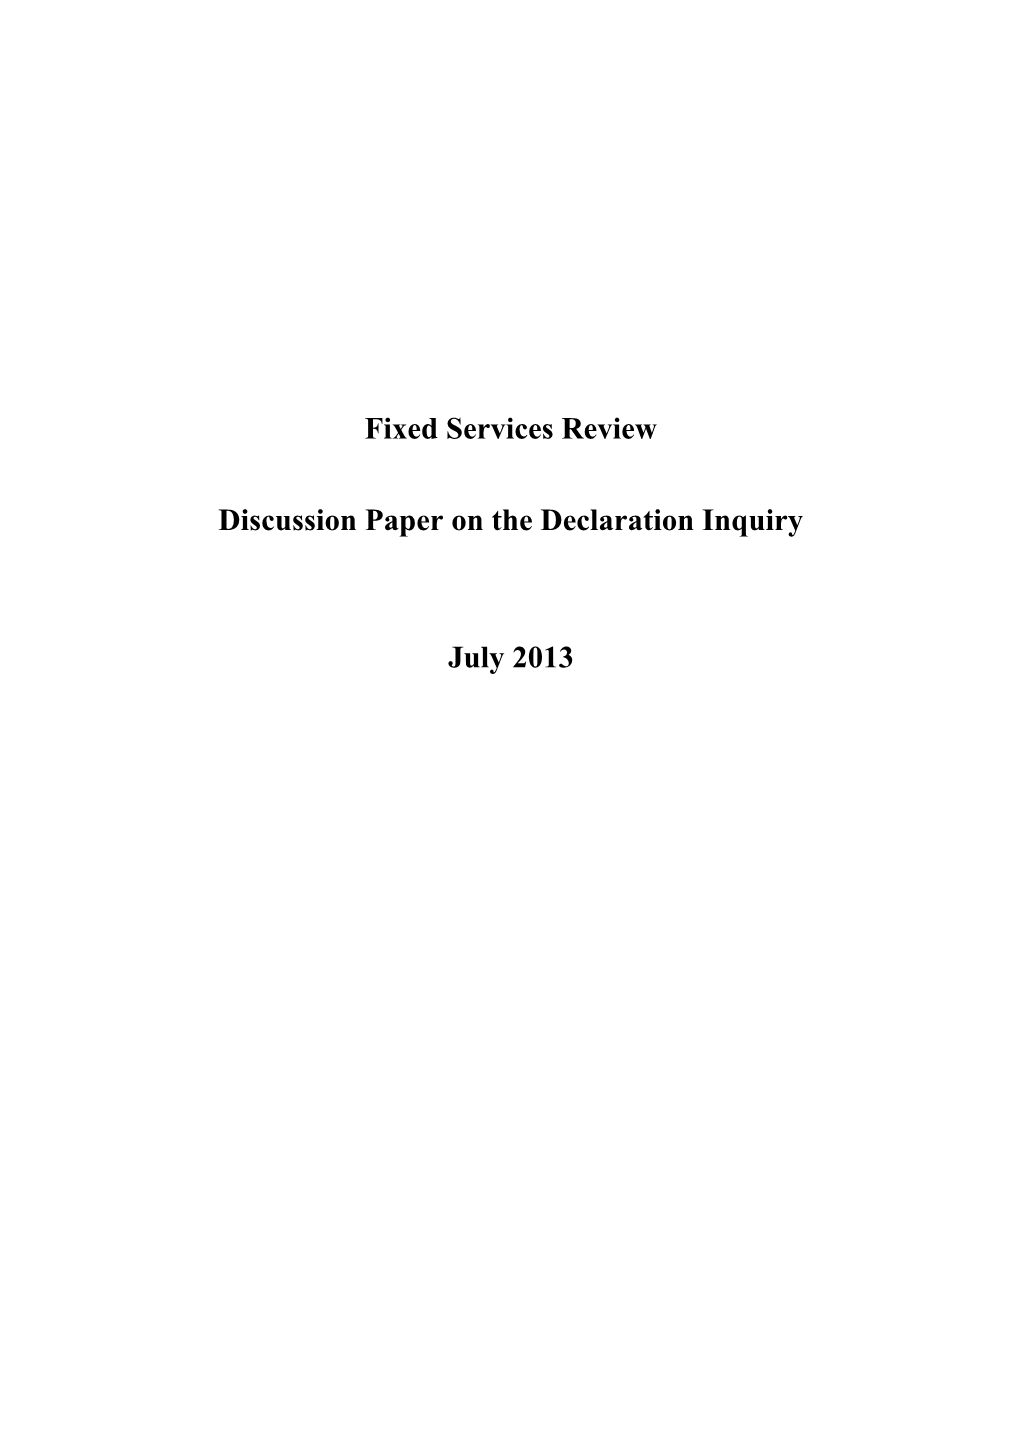 Fixed Services Review